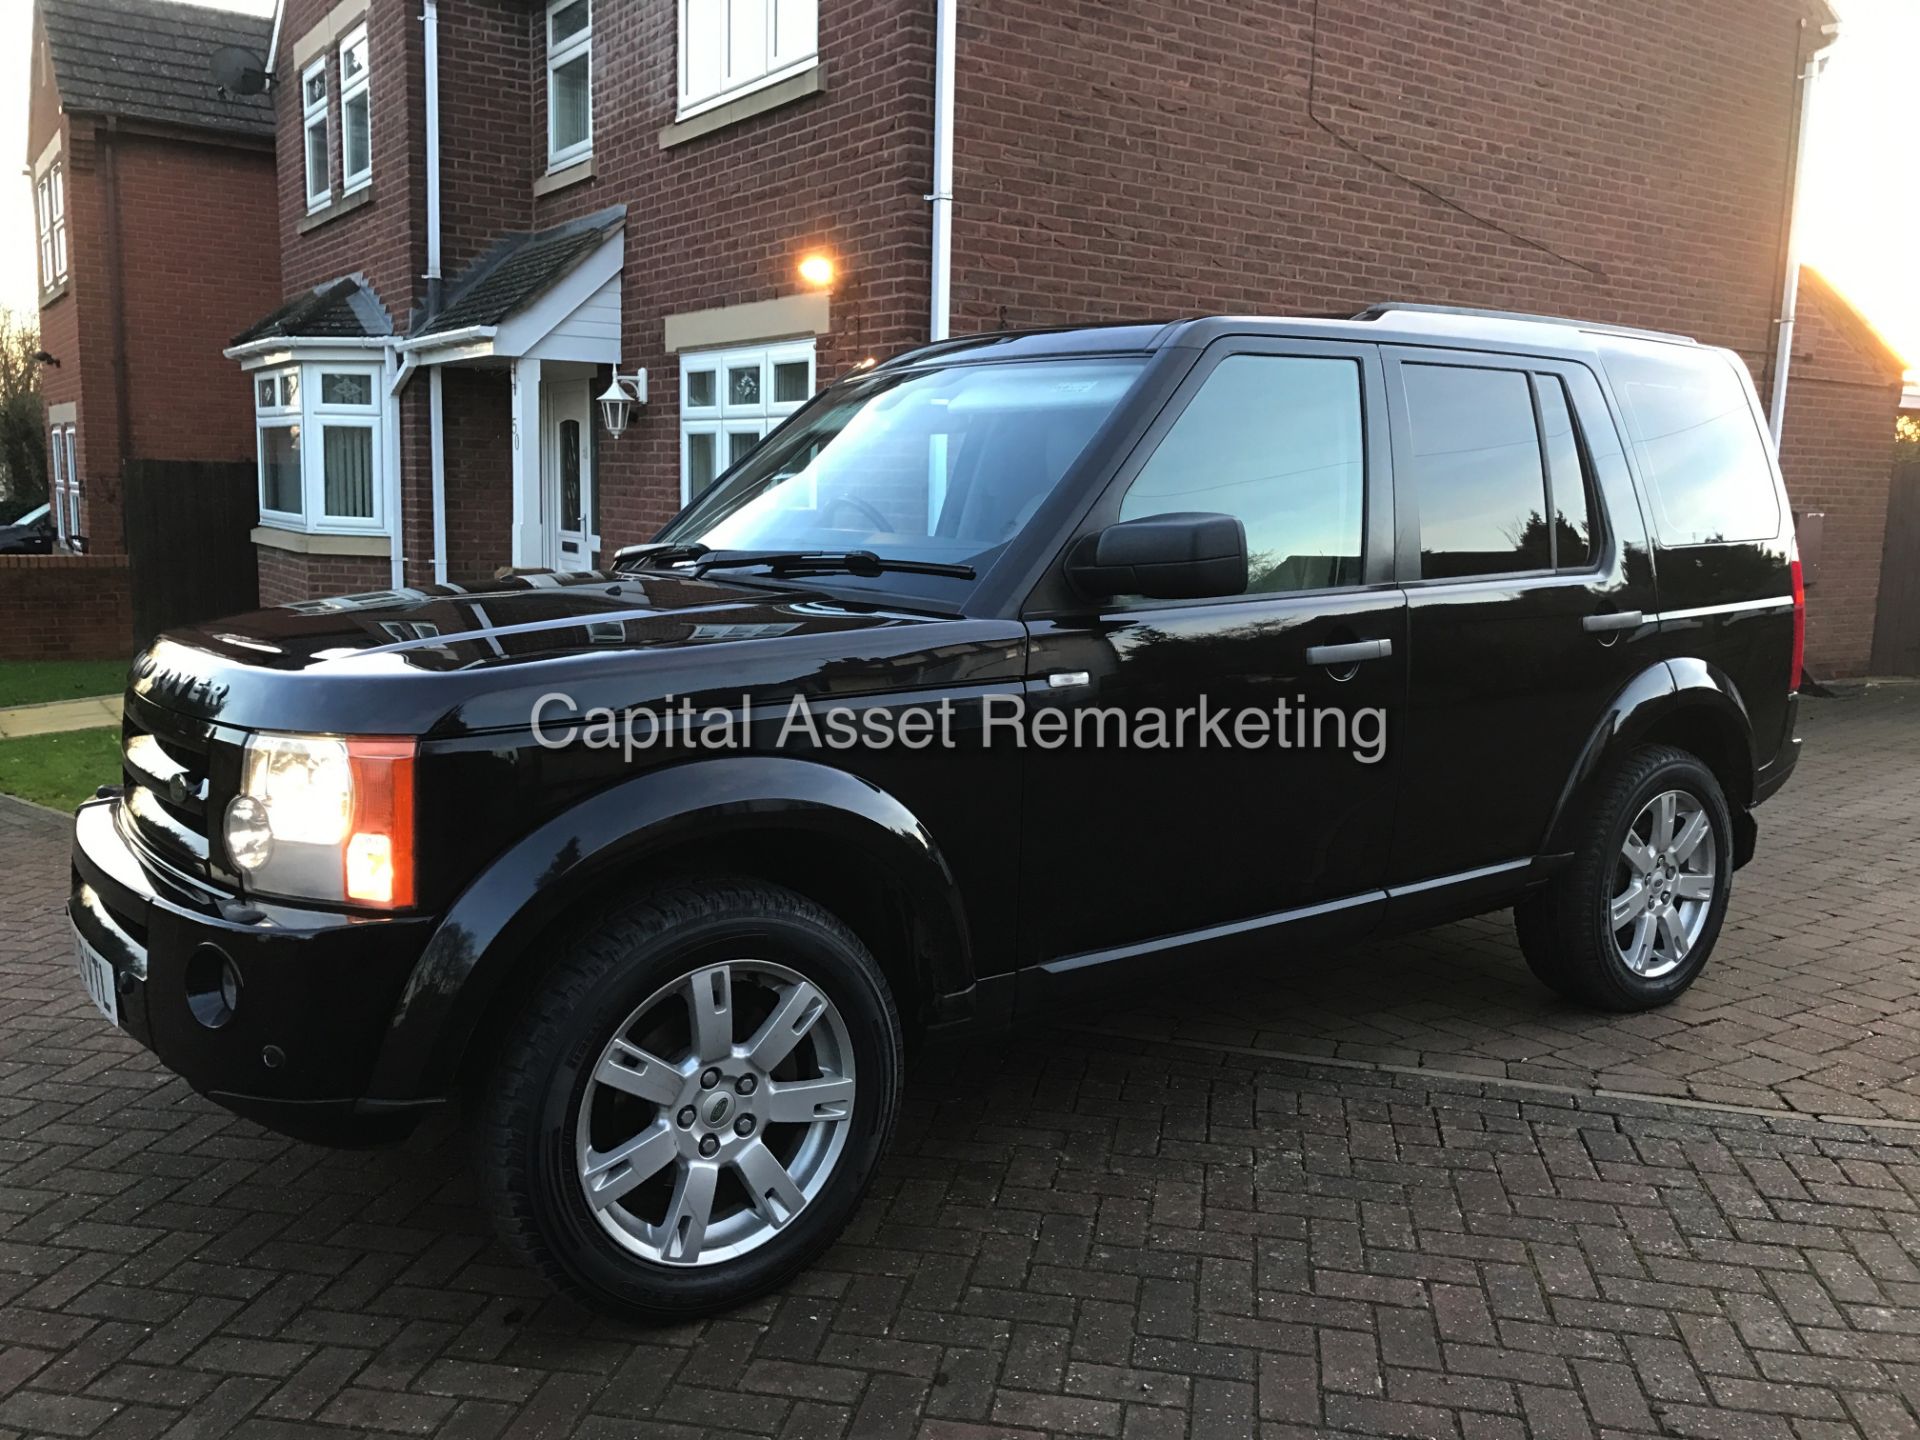 LANDROVER DISCOVERY 3 "TDV6" AUTO - (BLACK EDITION) - 09 REG - SAT NAV - LEATHER - 7 SEATER - WOW!!